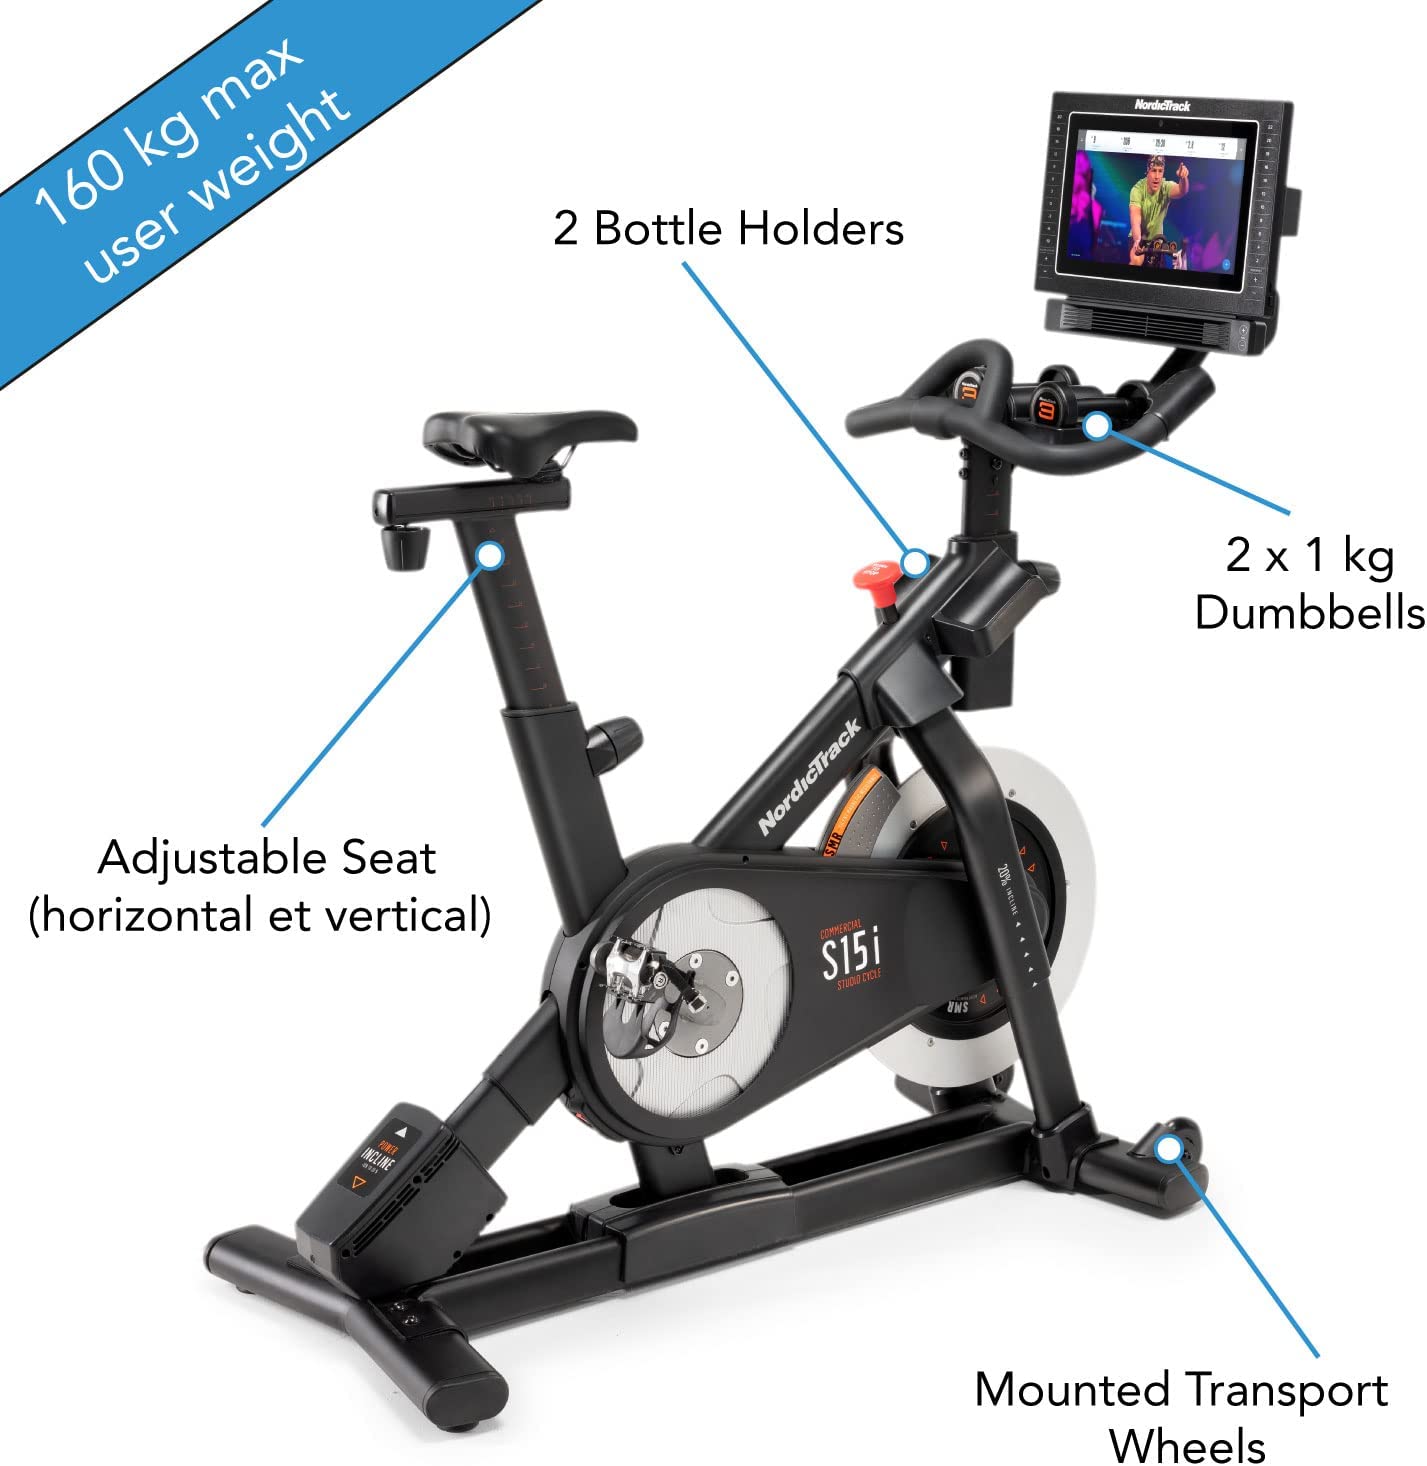 NordicTrack Commercial S15i Studio Cycle - main features 